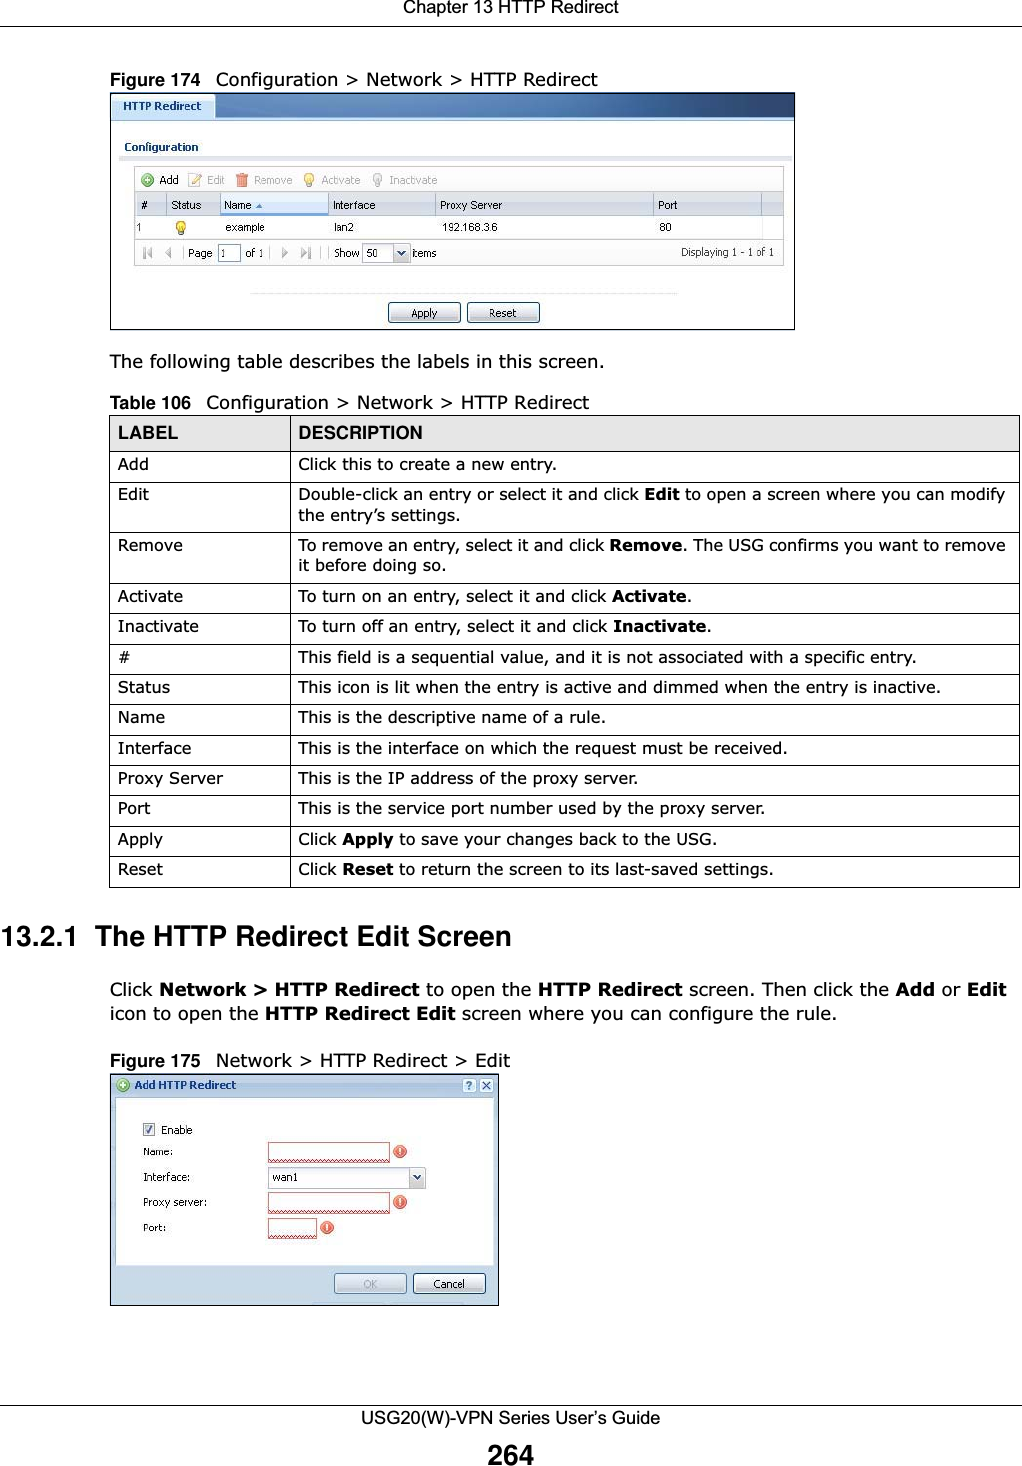 Chapter 13 HTTP RedirectUSG20(W)-VPN Series User’s Guide264Figure 174   Configuration &gt; Network &gt; HTTP Redirect    The following table describes the labels in this screen.  13.2.1  The HTTP Redirect Edit ScreenClick Network &gt; HTTP Redirect to open the HTTP Redirect screen. Then click the Add or Edit icon to open the HTTP Redirect Edit screen where you can configure the rule.Figure 175   Network &gt; HTTP Redirect &gt; Edit    Table 106   Configuration &gt; Network &gt; HTTP RedirectLABEL DESCRIPTIONAdd Click this to create a new entry.Edit Double-click an entry or select it and click Edit to open a screen where you can modify the entry’s settings. Remove To remove an entry, select it and click Remove. The USG confirms you want to remove it before doing so.Activate To turn on an entry, select it and click Activate.Inactivate To turn off an entry, select it and click Inactivate.# This field is a sequential value, and it is not associated with a specific entry.Status This icon is lit when the entry is active and dimmed when the entry is inactive.Name This is the descriptive name of a rule.Interface This is the interface on which the request must be received.Proxy Server This is the IP address of the proxy server.Port This is the service port number used by the proxy server.Apply Click Apply to save your changes back to the USG.Reset Click Reset to return the screen to its last-saved settings. 